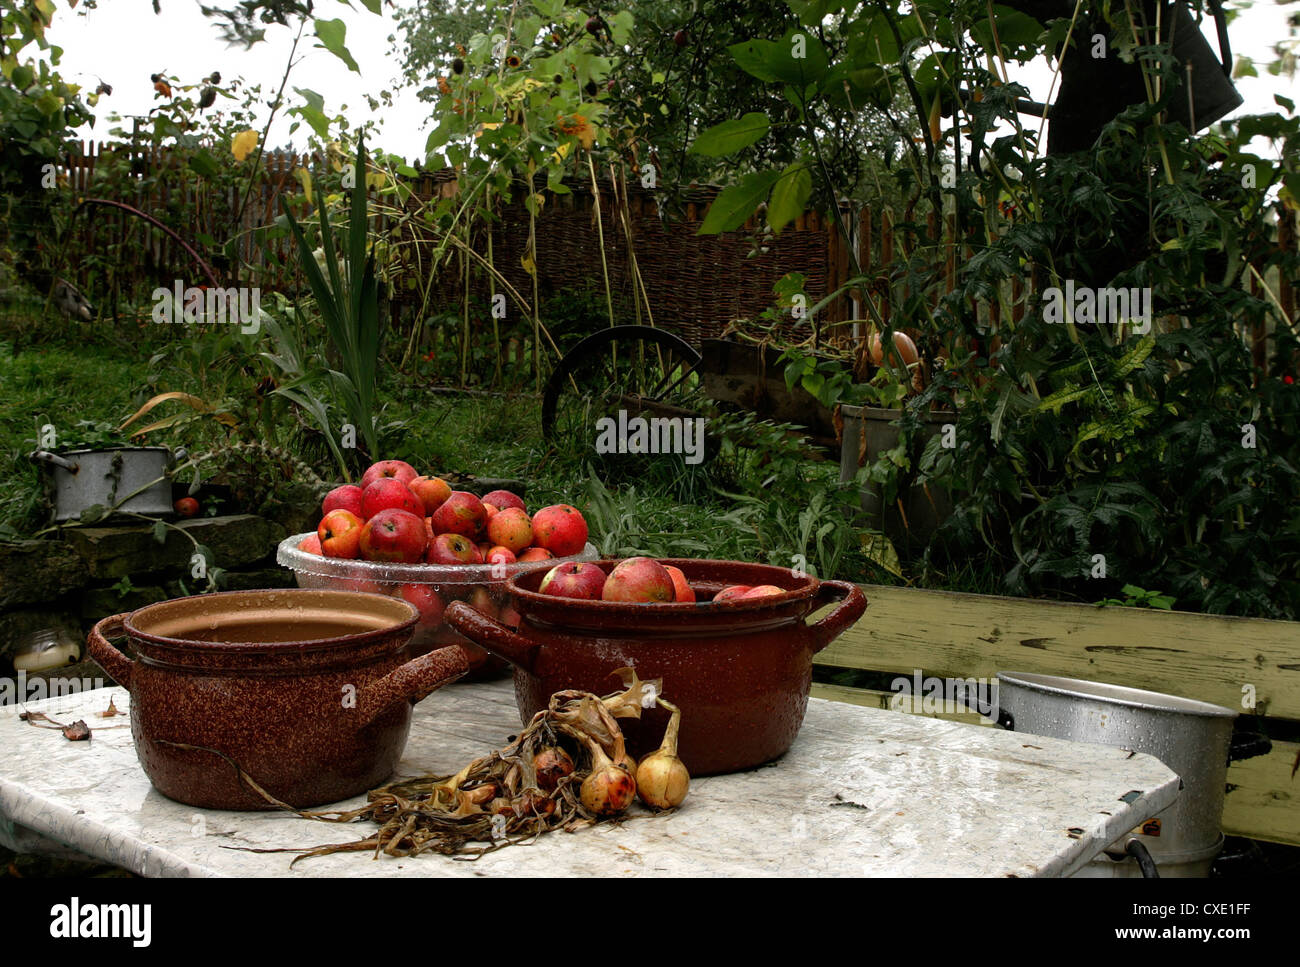 Herms Gruen, picked apples on a garden table Stock Photo